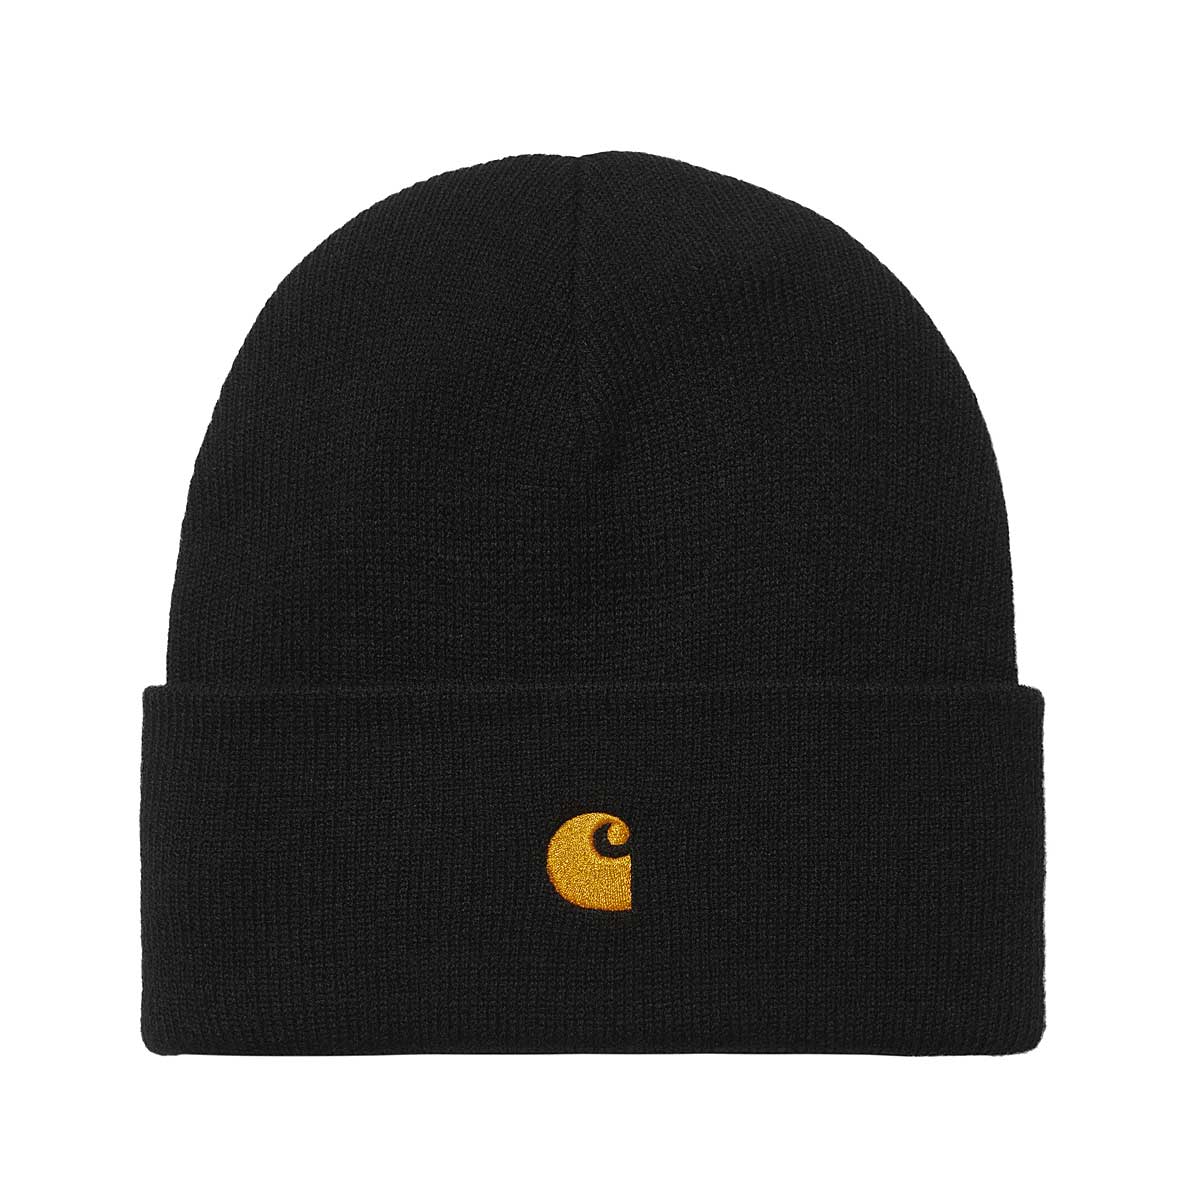 Image of Carhartt Wip Chase Beanie, Black / Gold